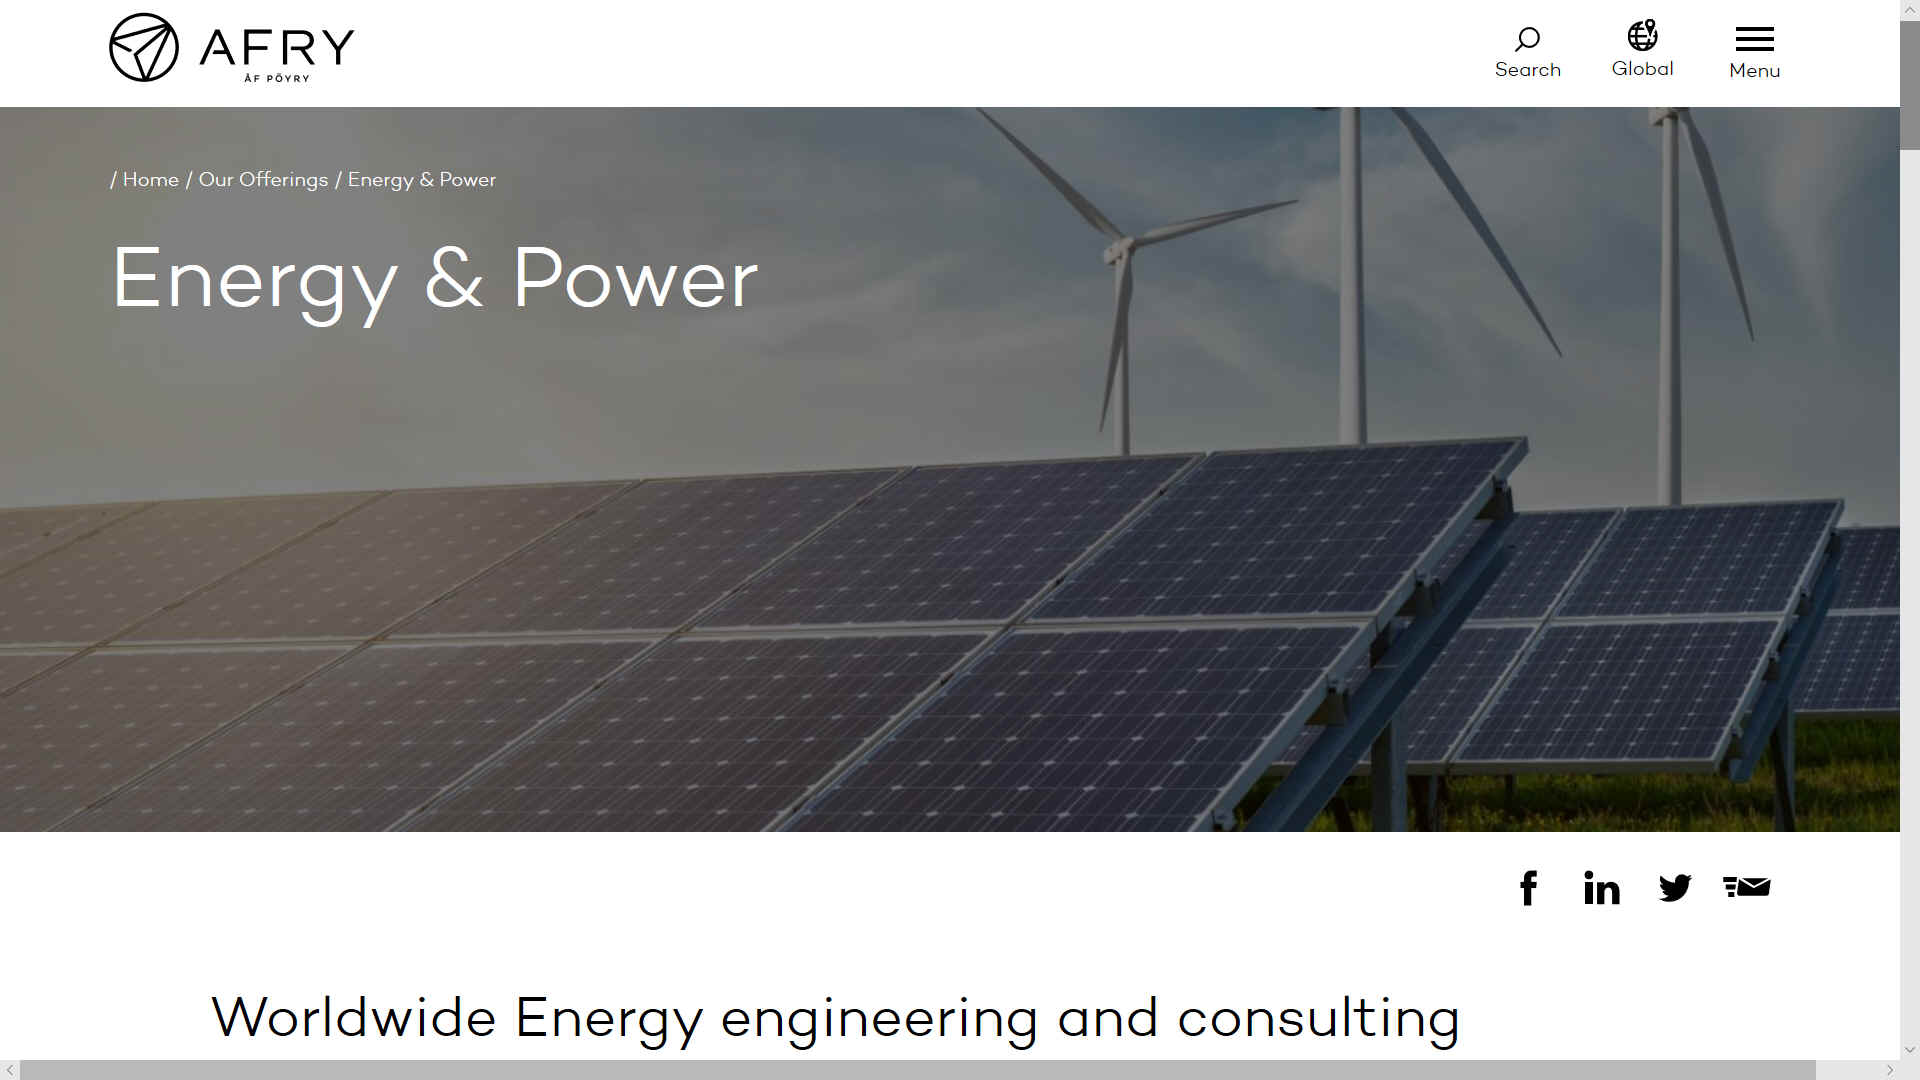 Worldwide energy consulting AFRY